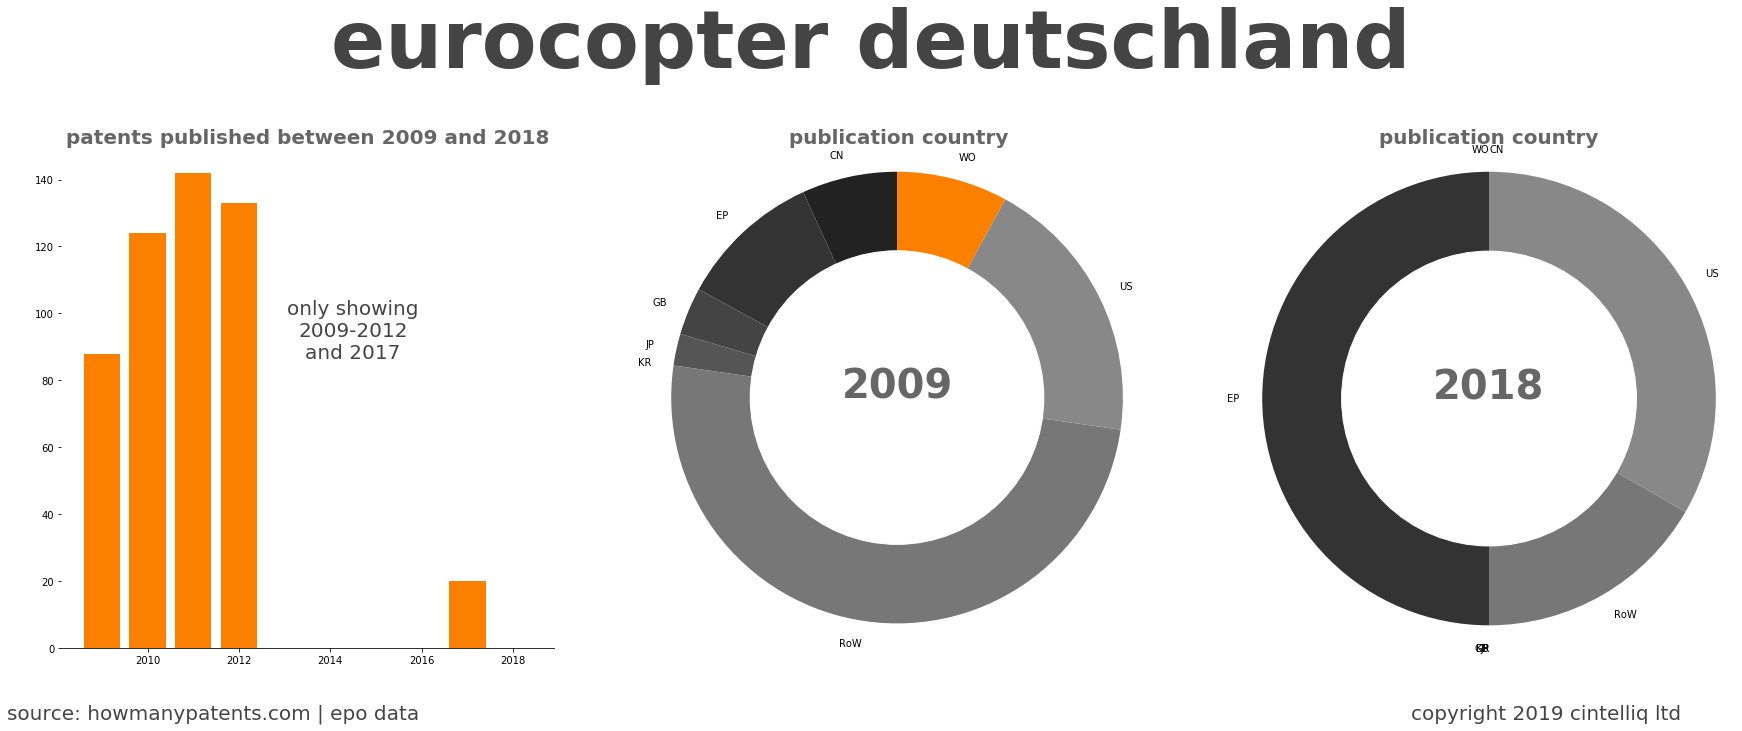 summary of patents for Eurocopter Deutschland